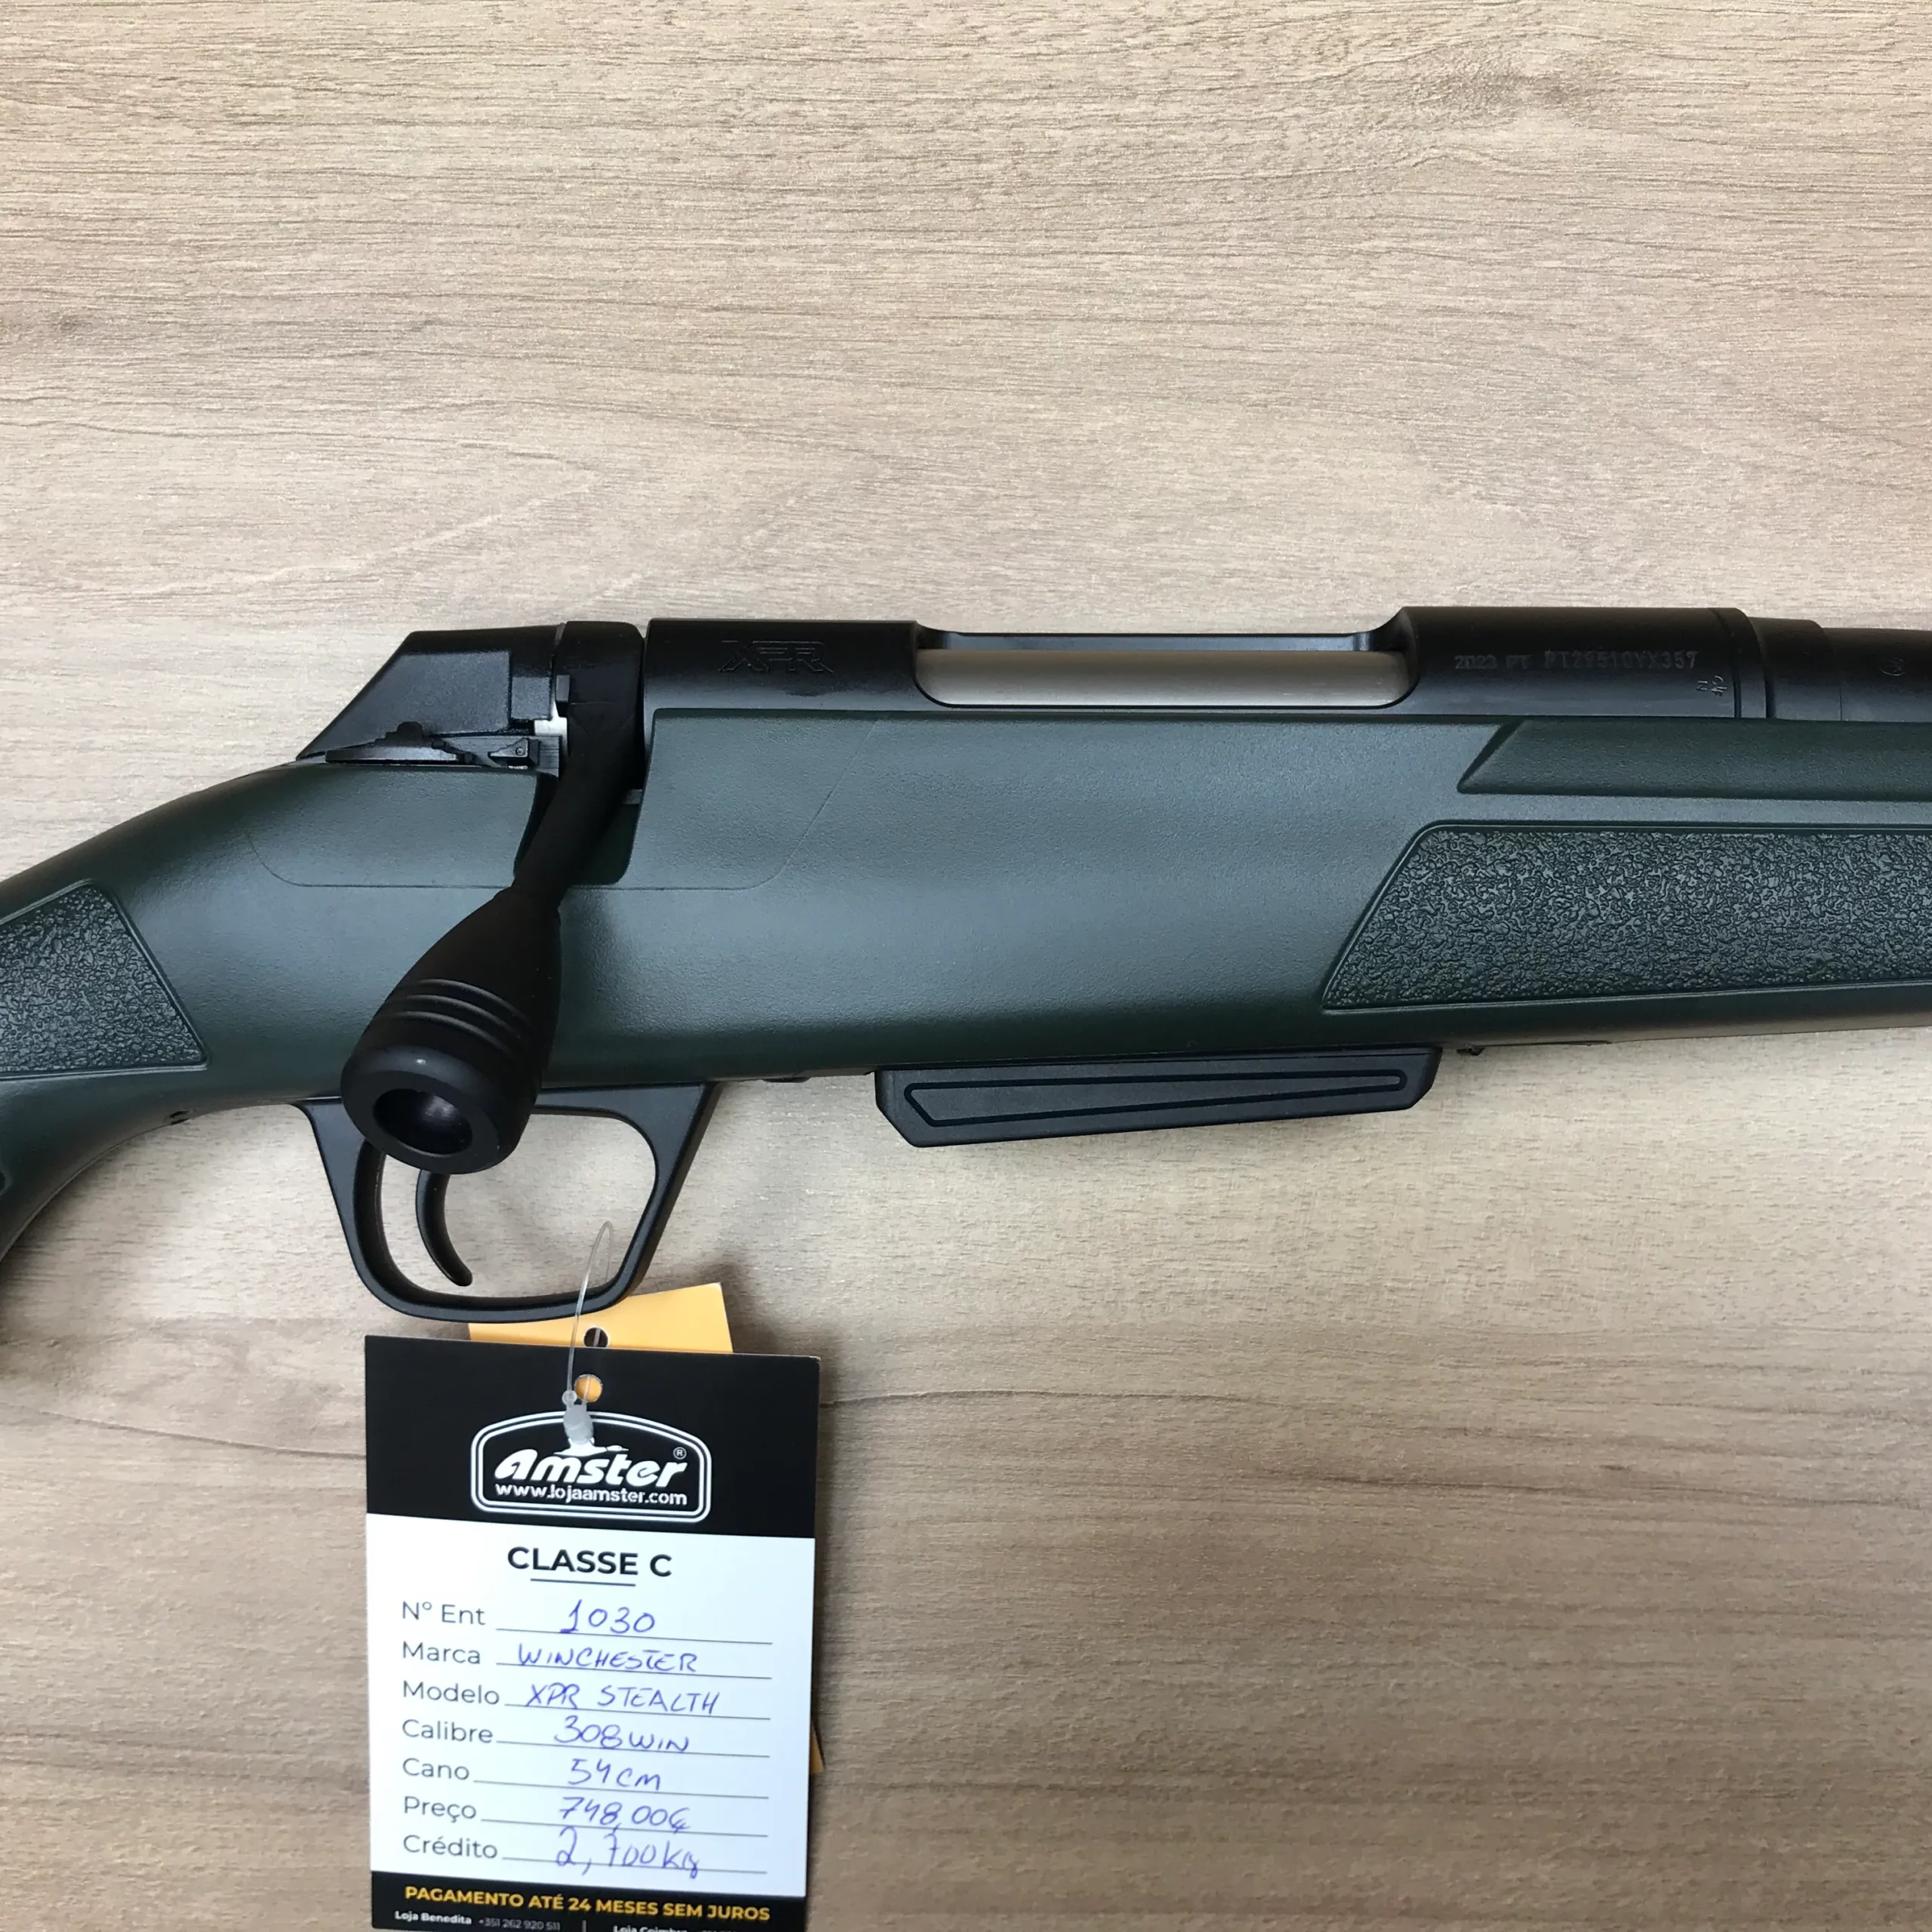 Winchester XPR Stealth 308 Win